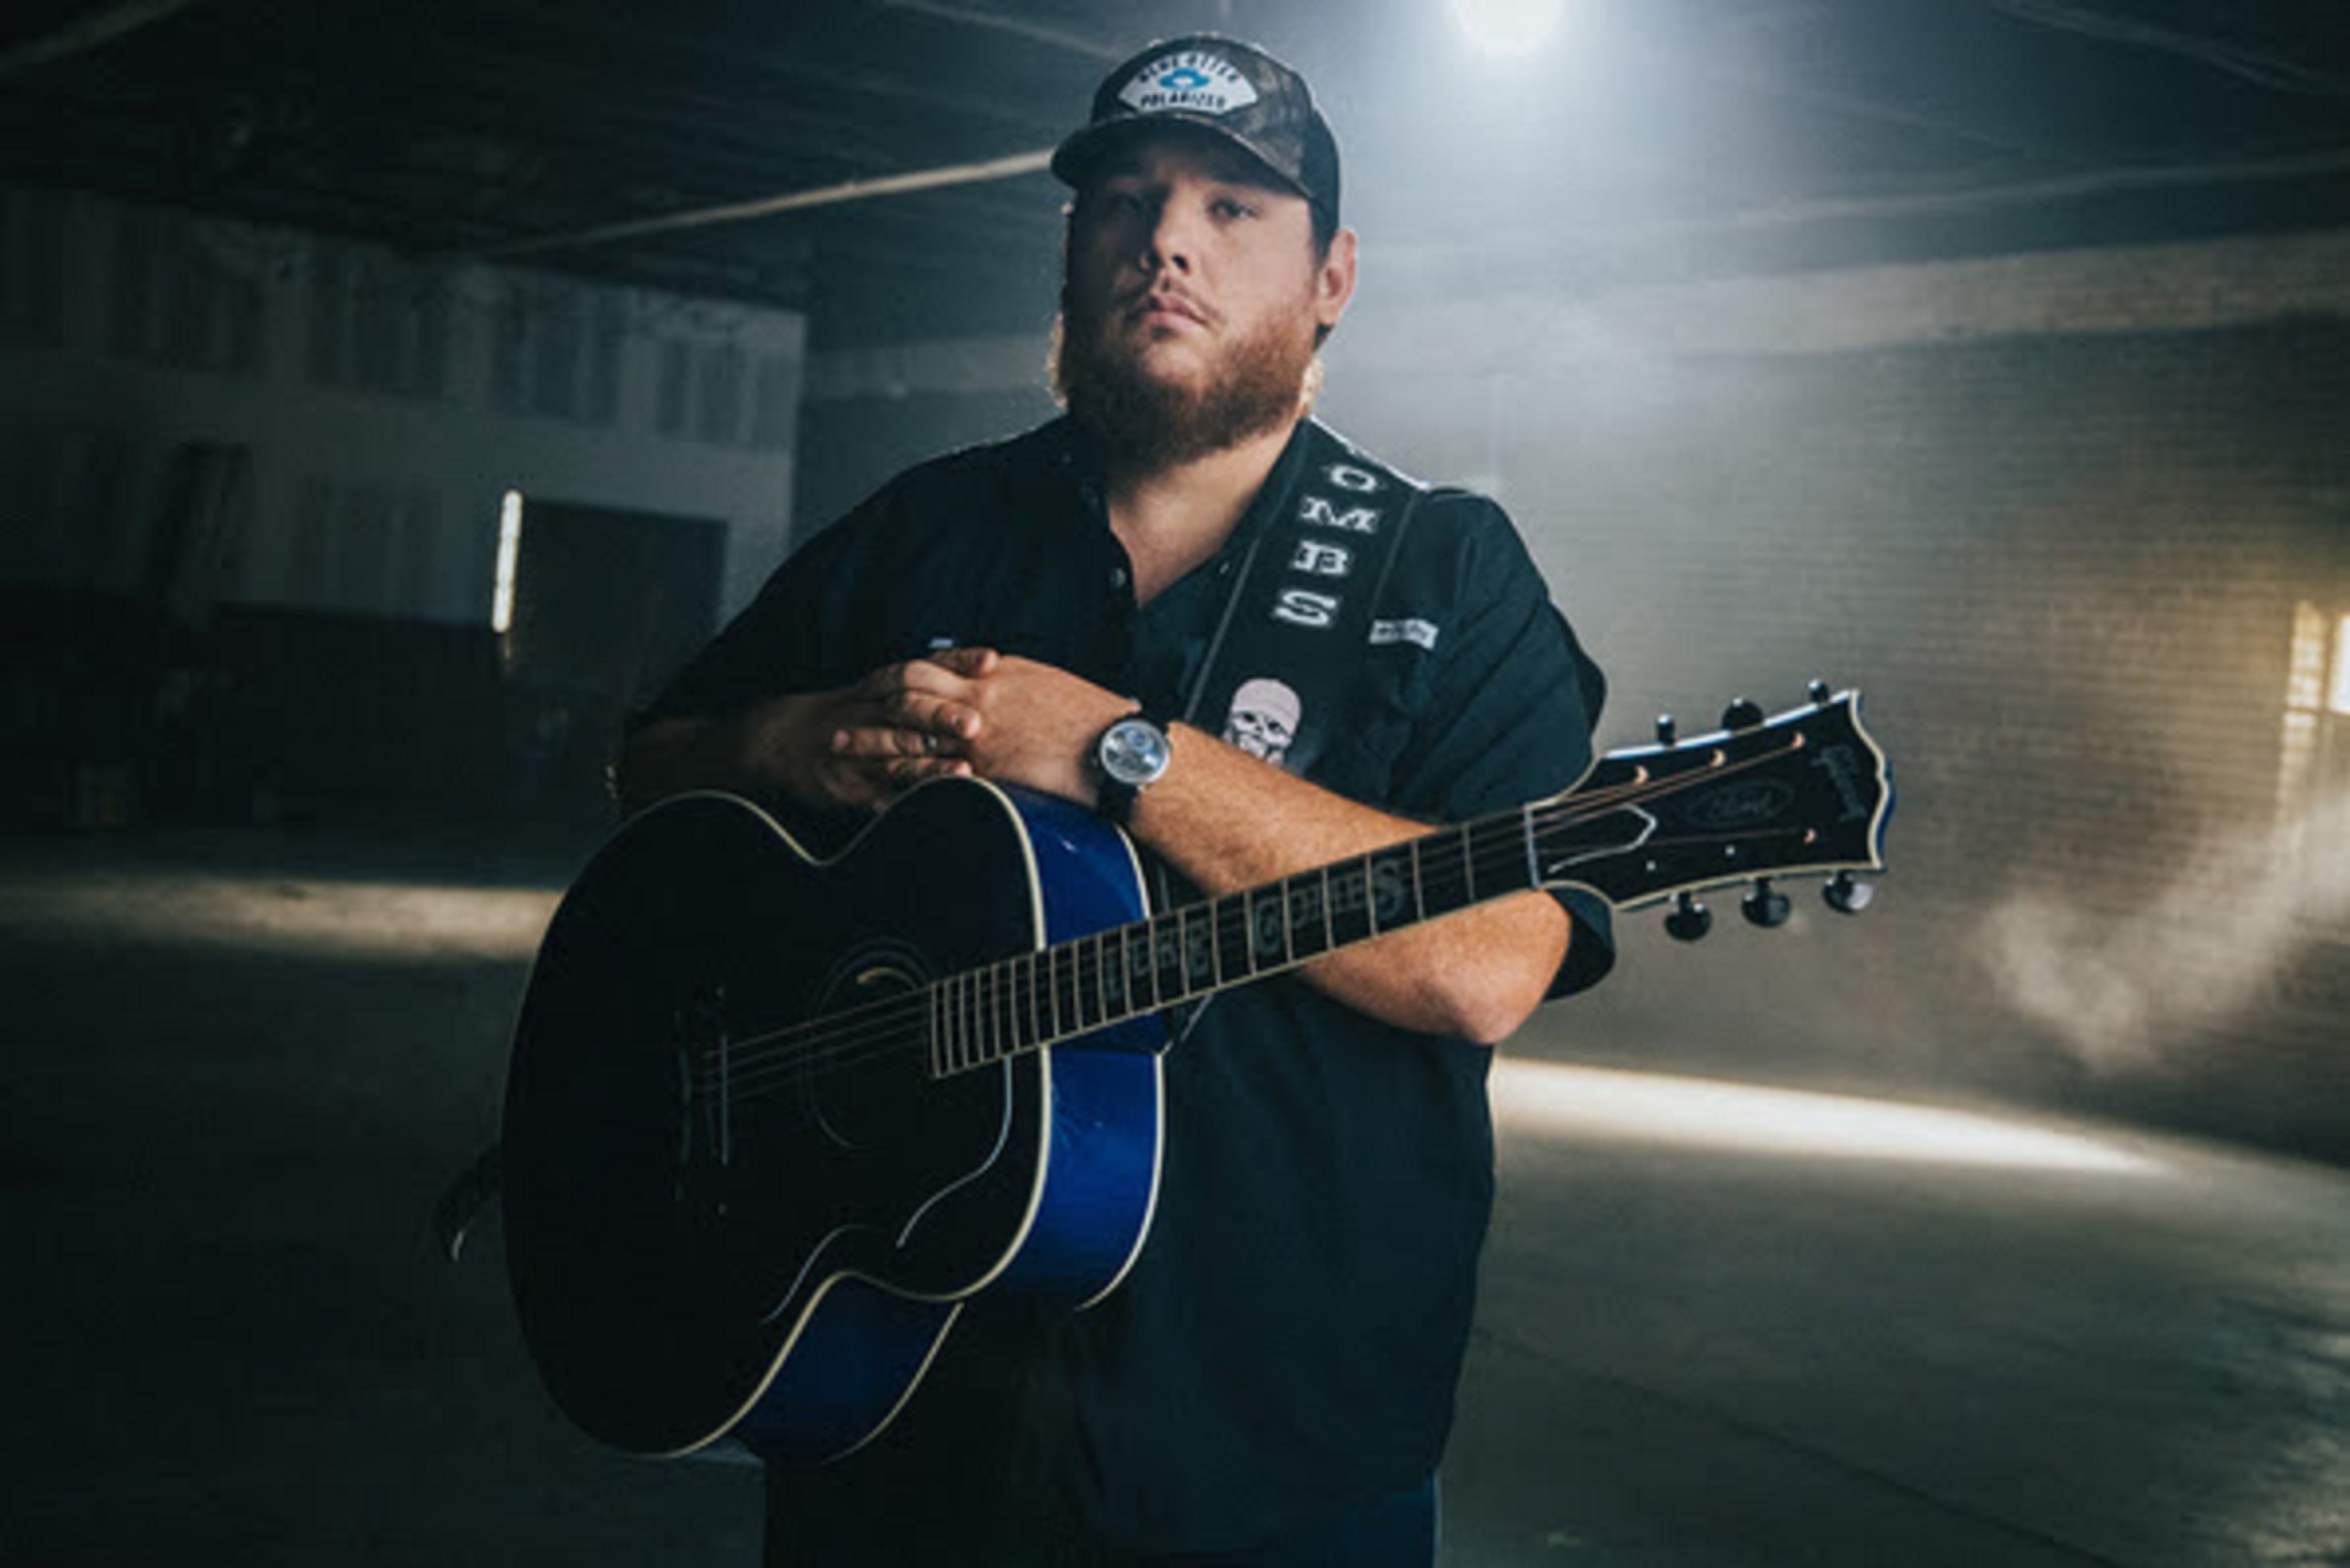 Luke Combs nominated for Best Country Solo Performance at 64th GRAMMY Awards